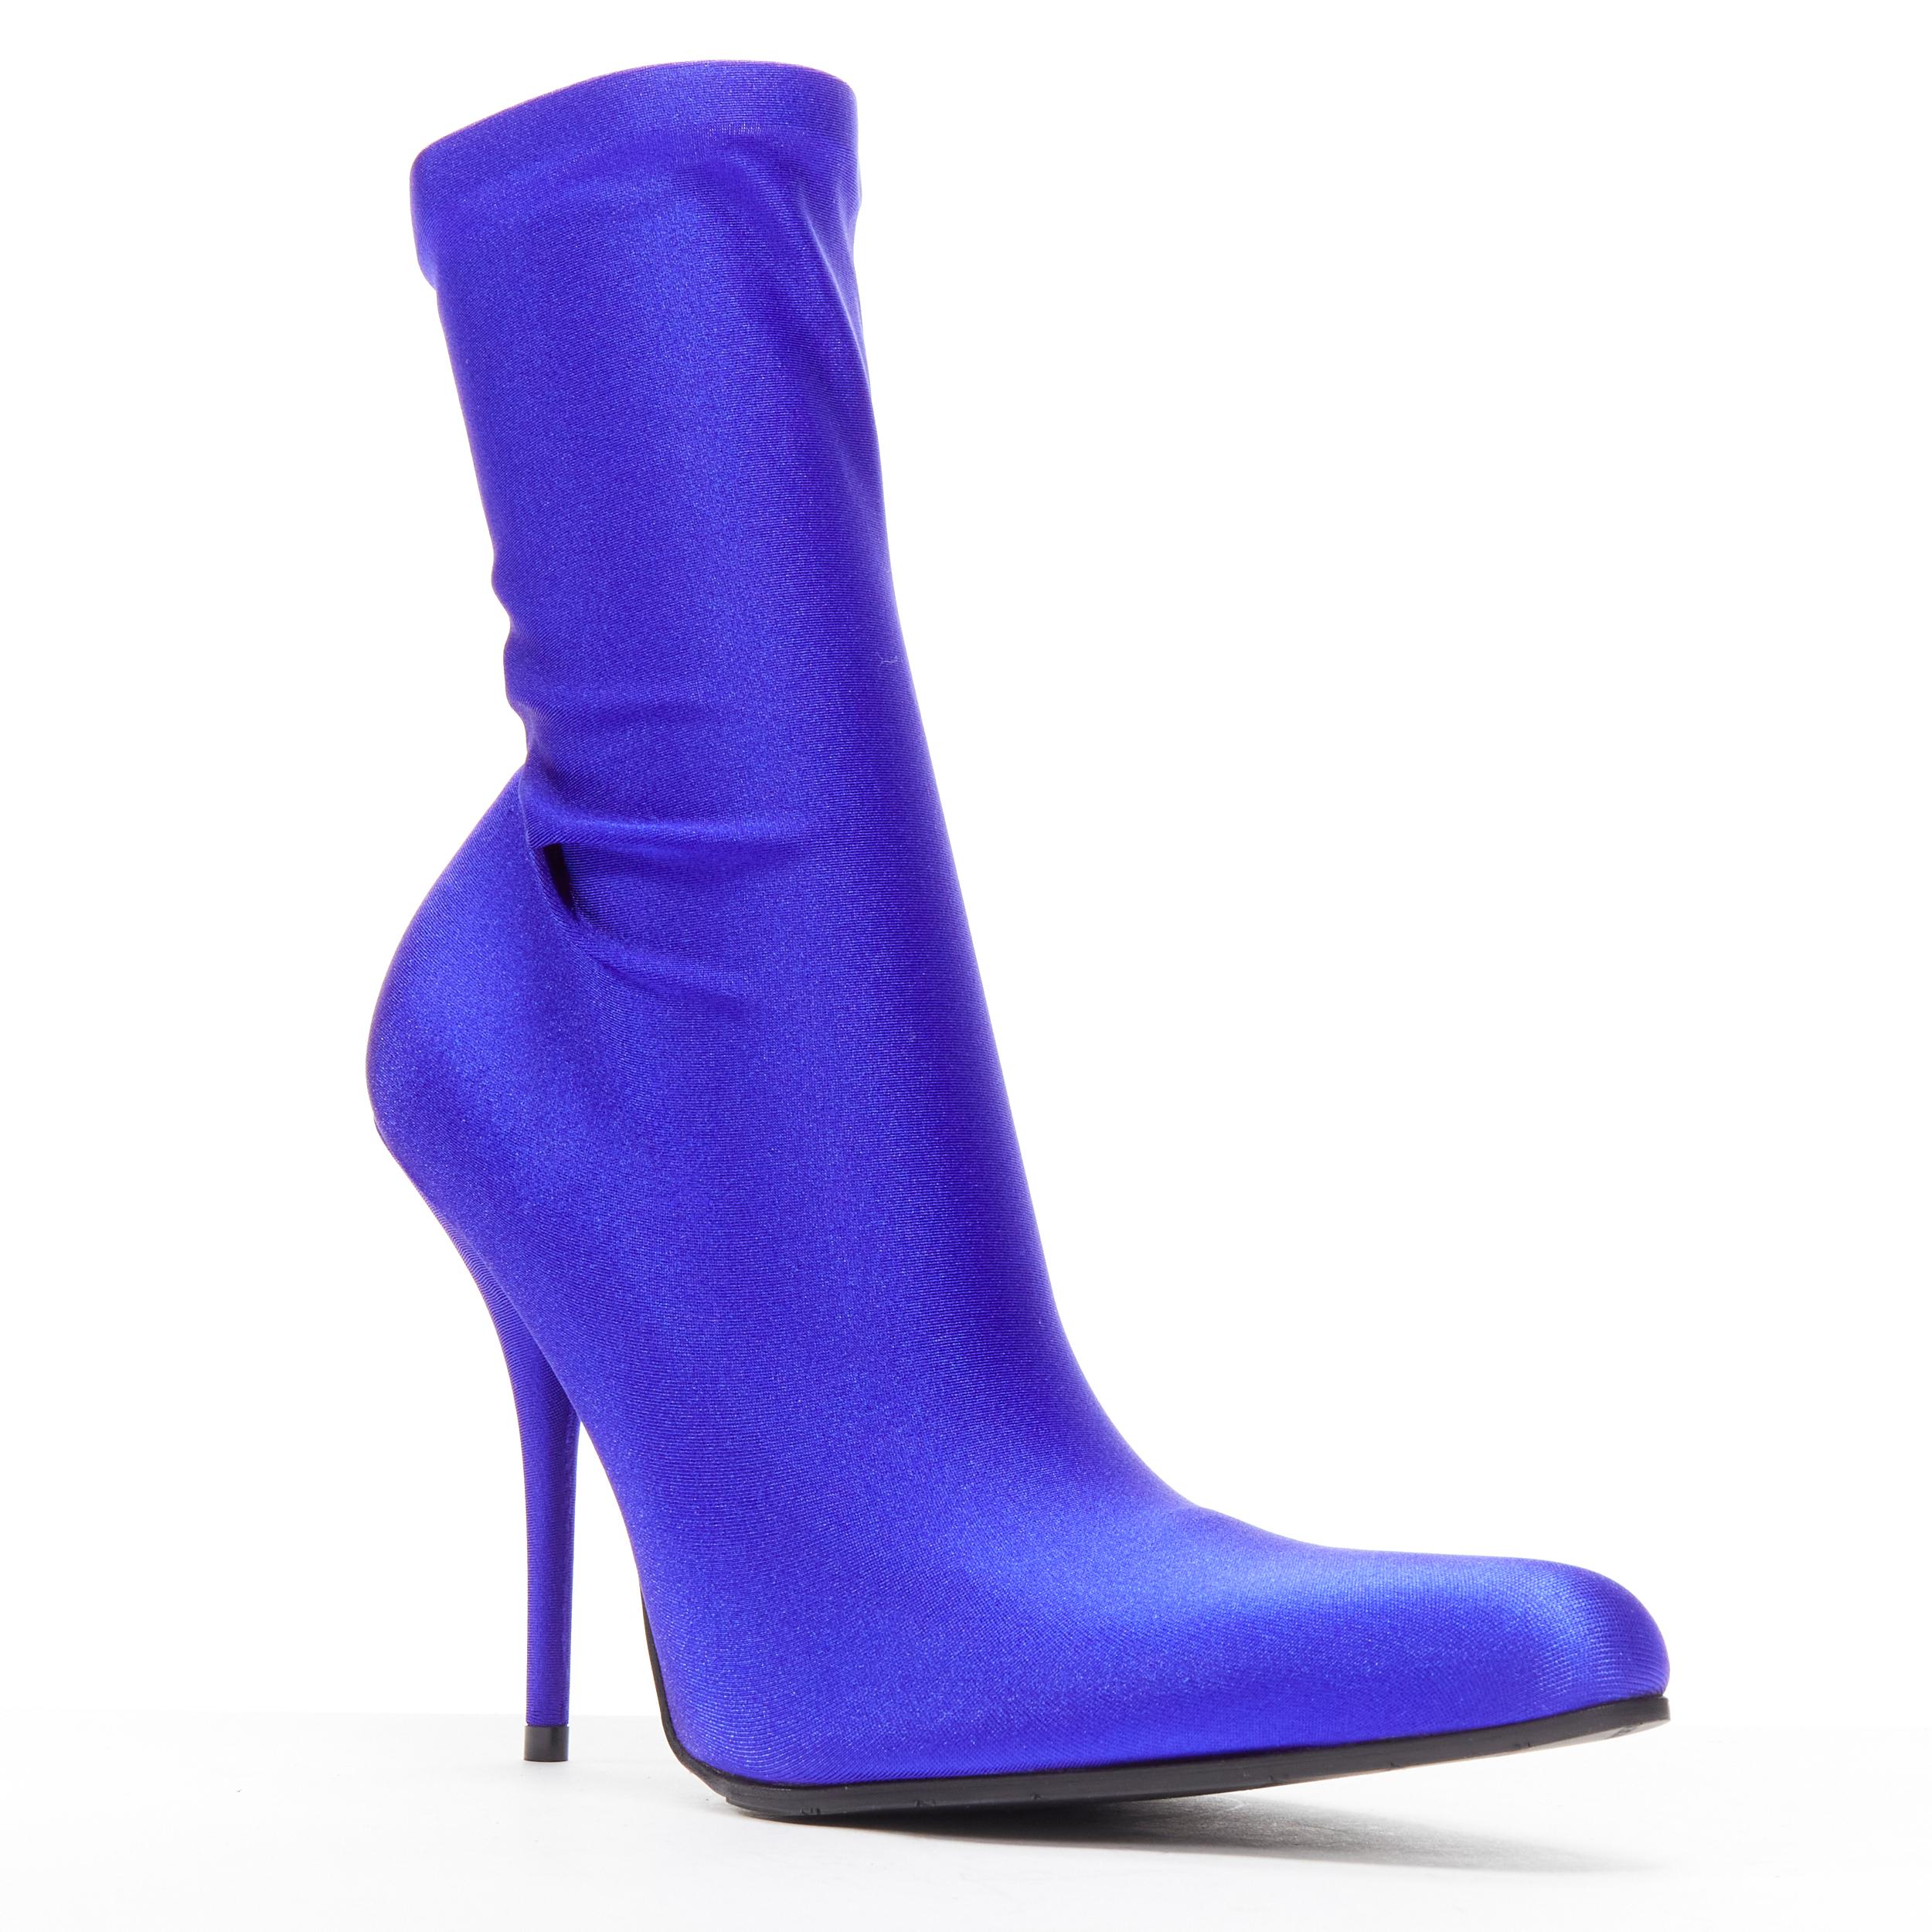 new BALENCIAGA Demna blue lycra high heeled sock boots EU37 Kim Kardashian
Reference: TGAS/D00193
Brand: Balenciaga
Designer: Demna
Model: Sock boot
Material: Jersey
Color: Blue
Pattern: Solid
Closure: Stretchy
Lining: Black Leather
Extra Details: